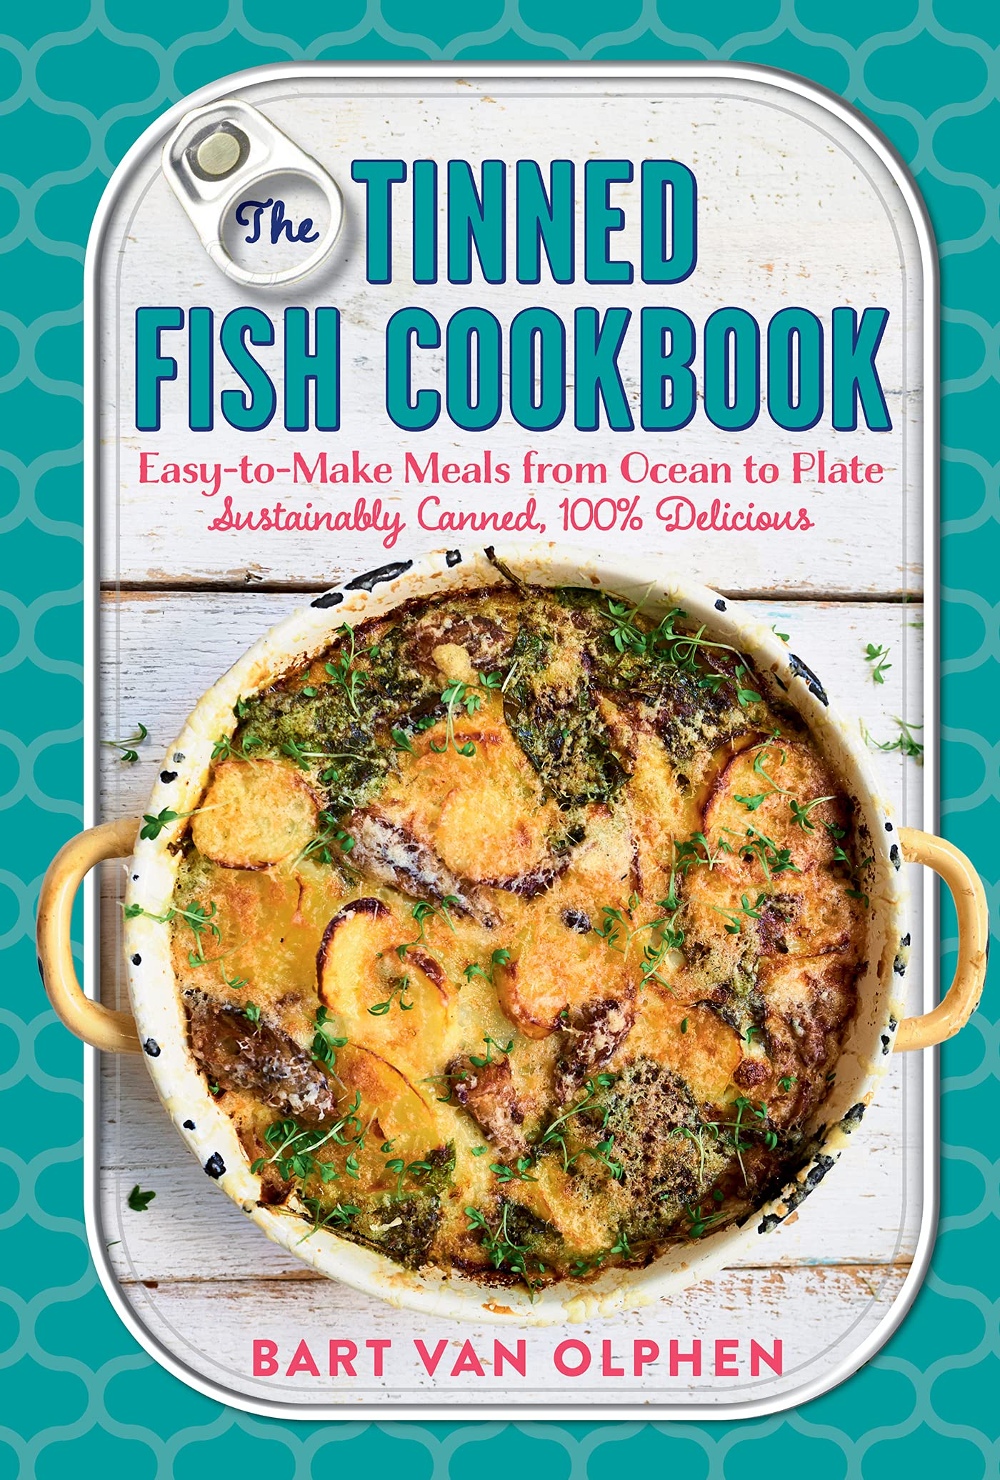 Win A Copy of The Tinned Fish Cookbook – Leite’s Culinaria